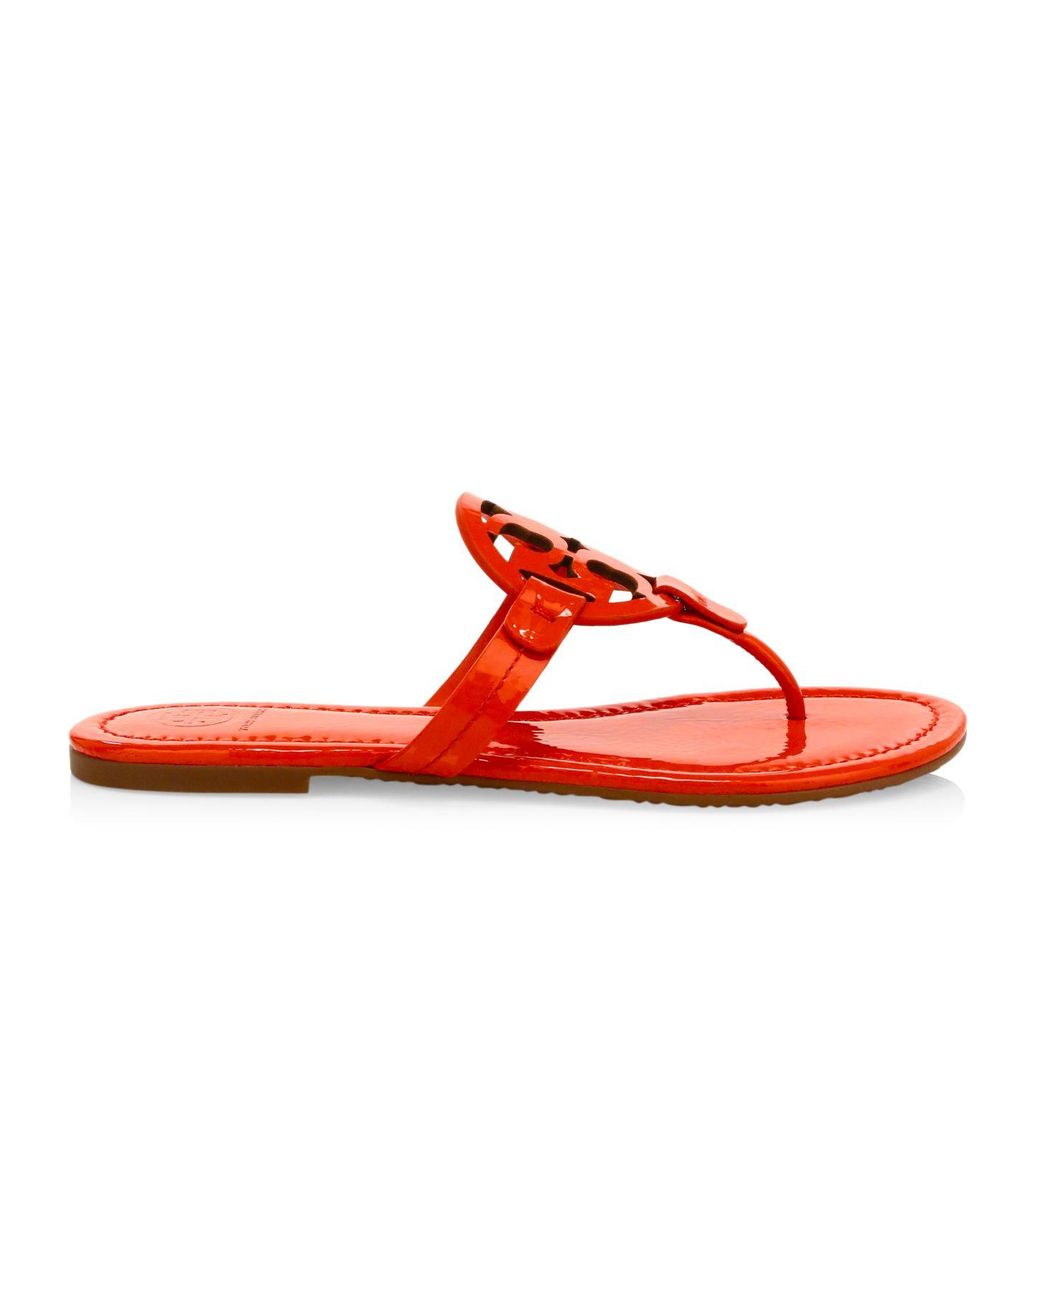 tory burch miller red patent